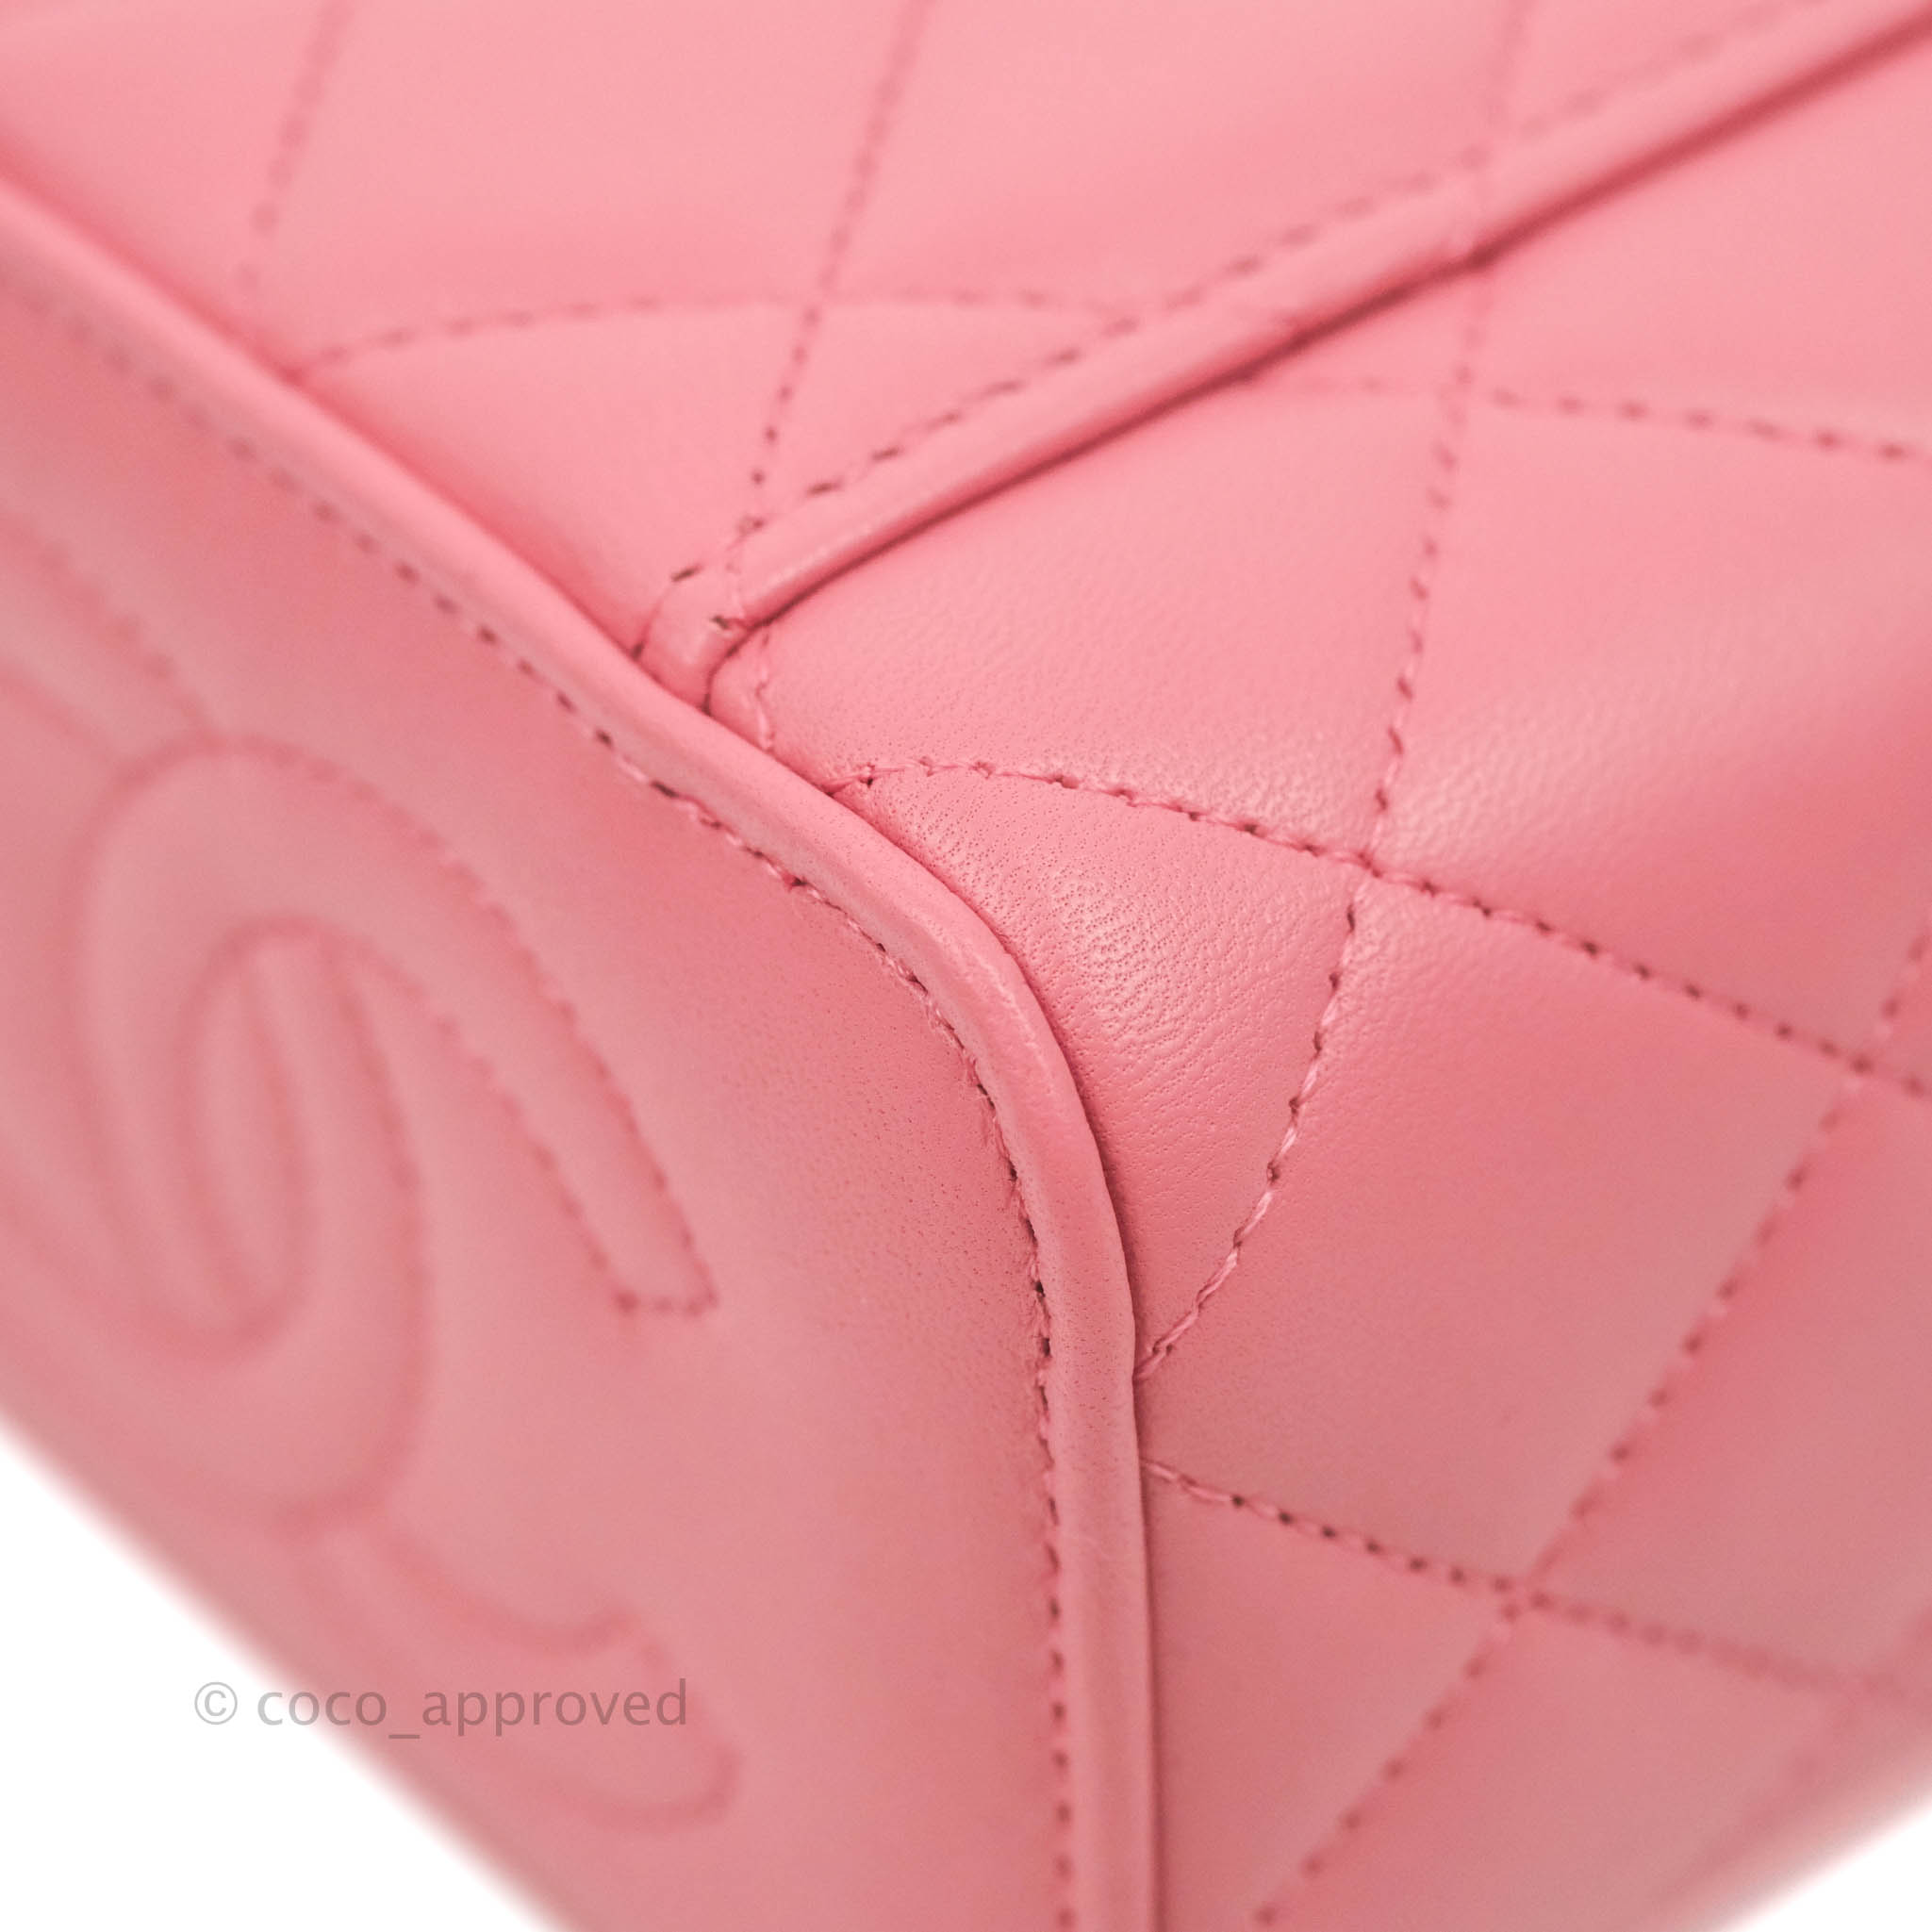 Chanel CC Top Handle Vanity Case with Chain Quilted Caviar Small Pink  2280811